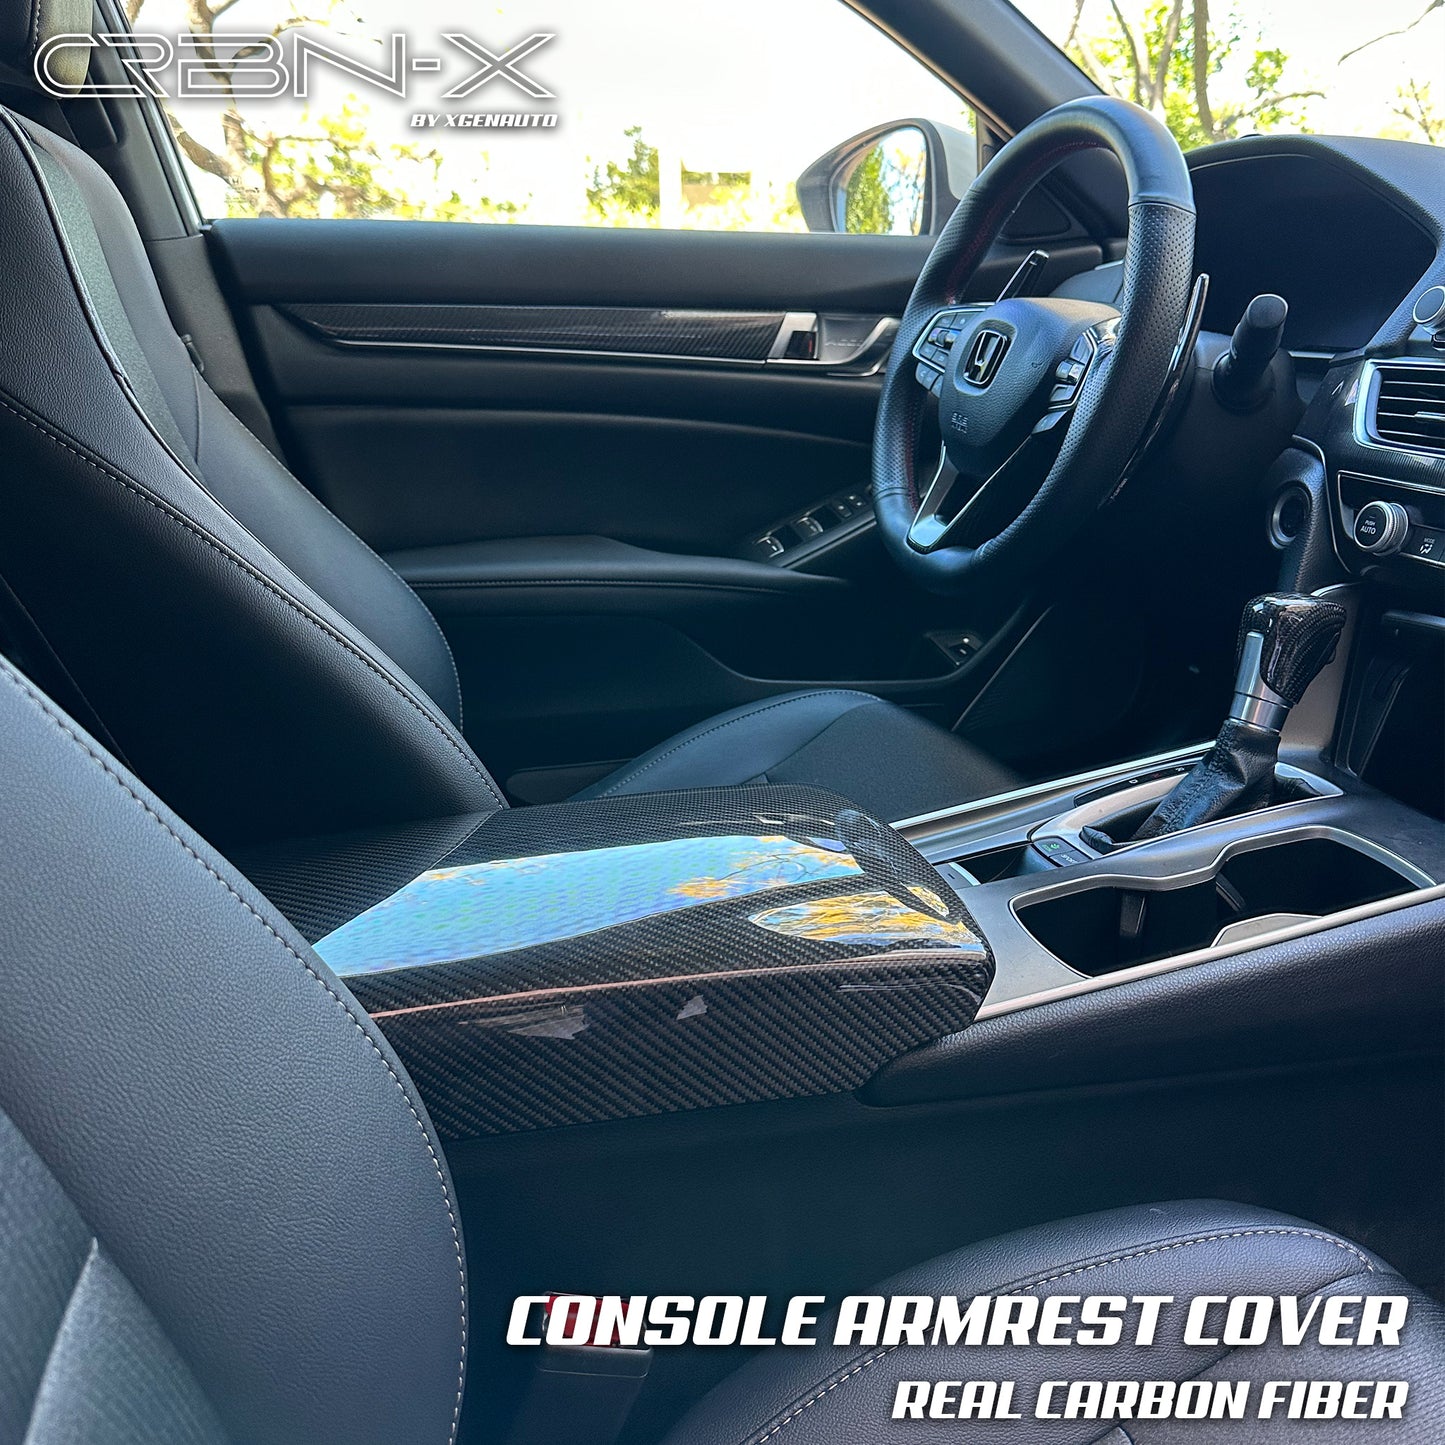 [ACCORD X] REAL CARBON FIBER ARMREST COVER